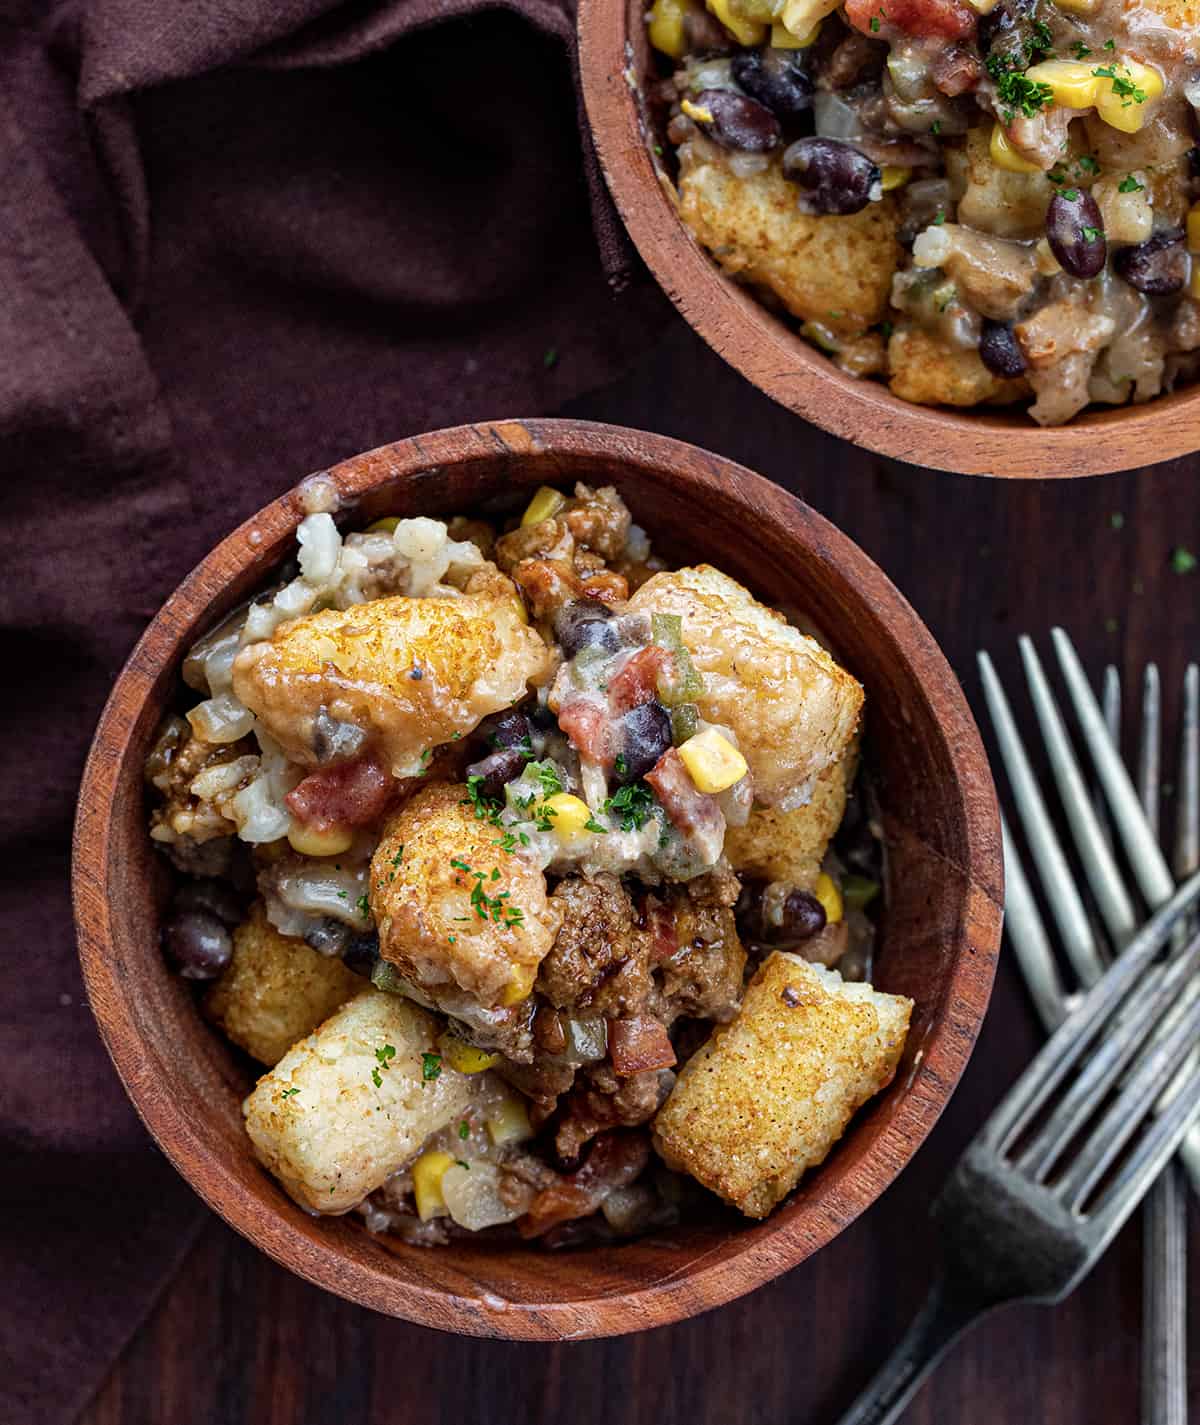 Bowls of Cowboy Tater Tot Casserole with Forks on a Cutting Board.